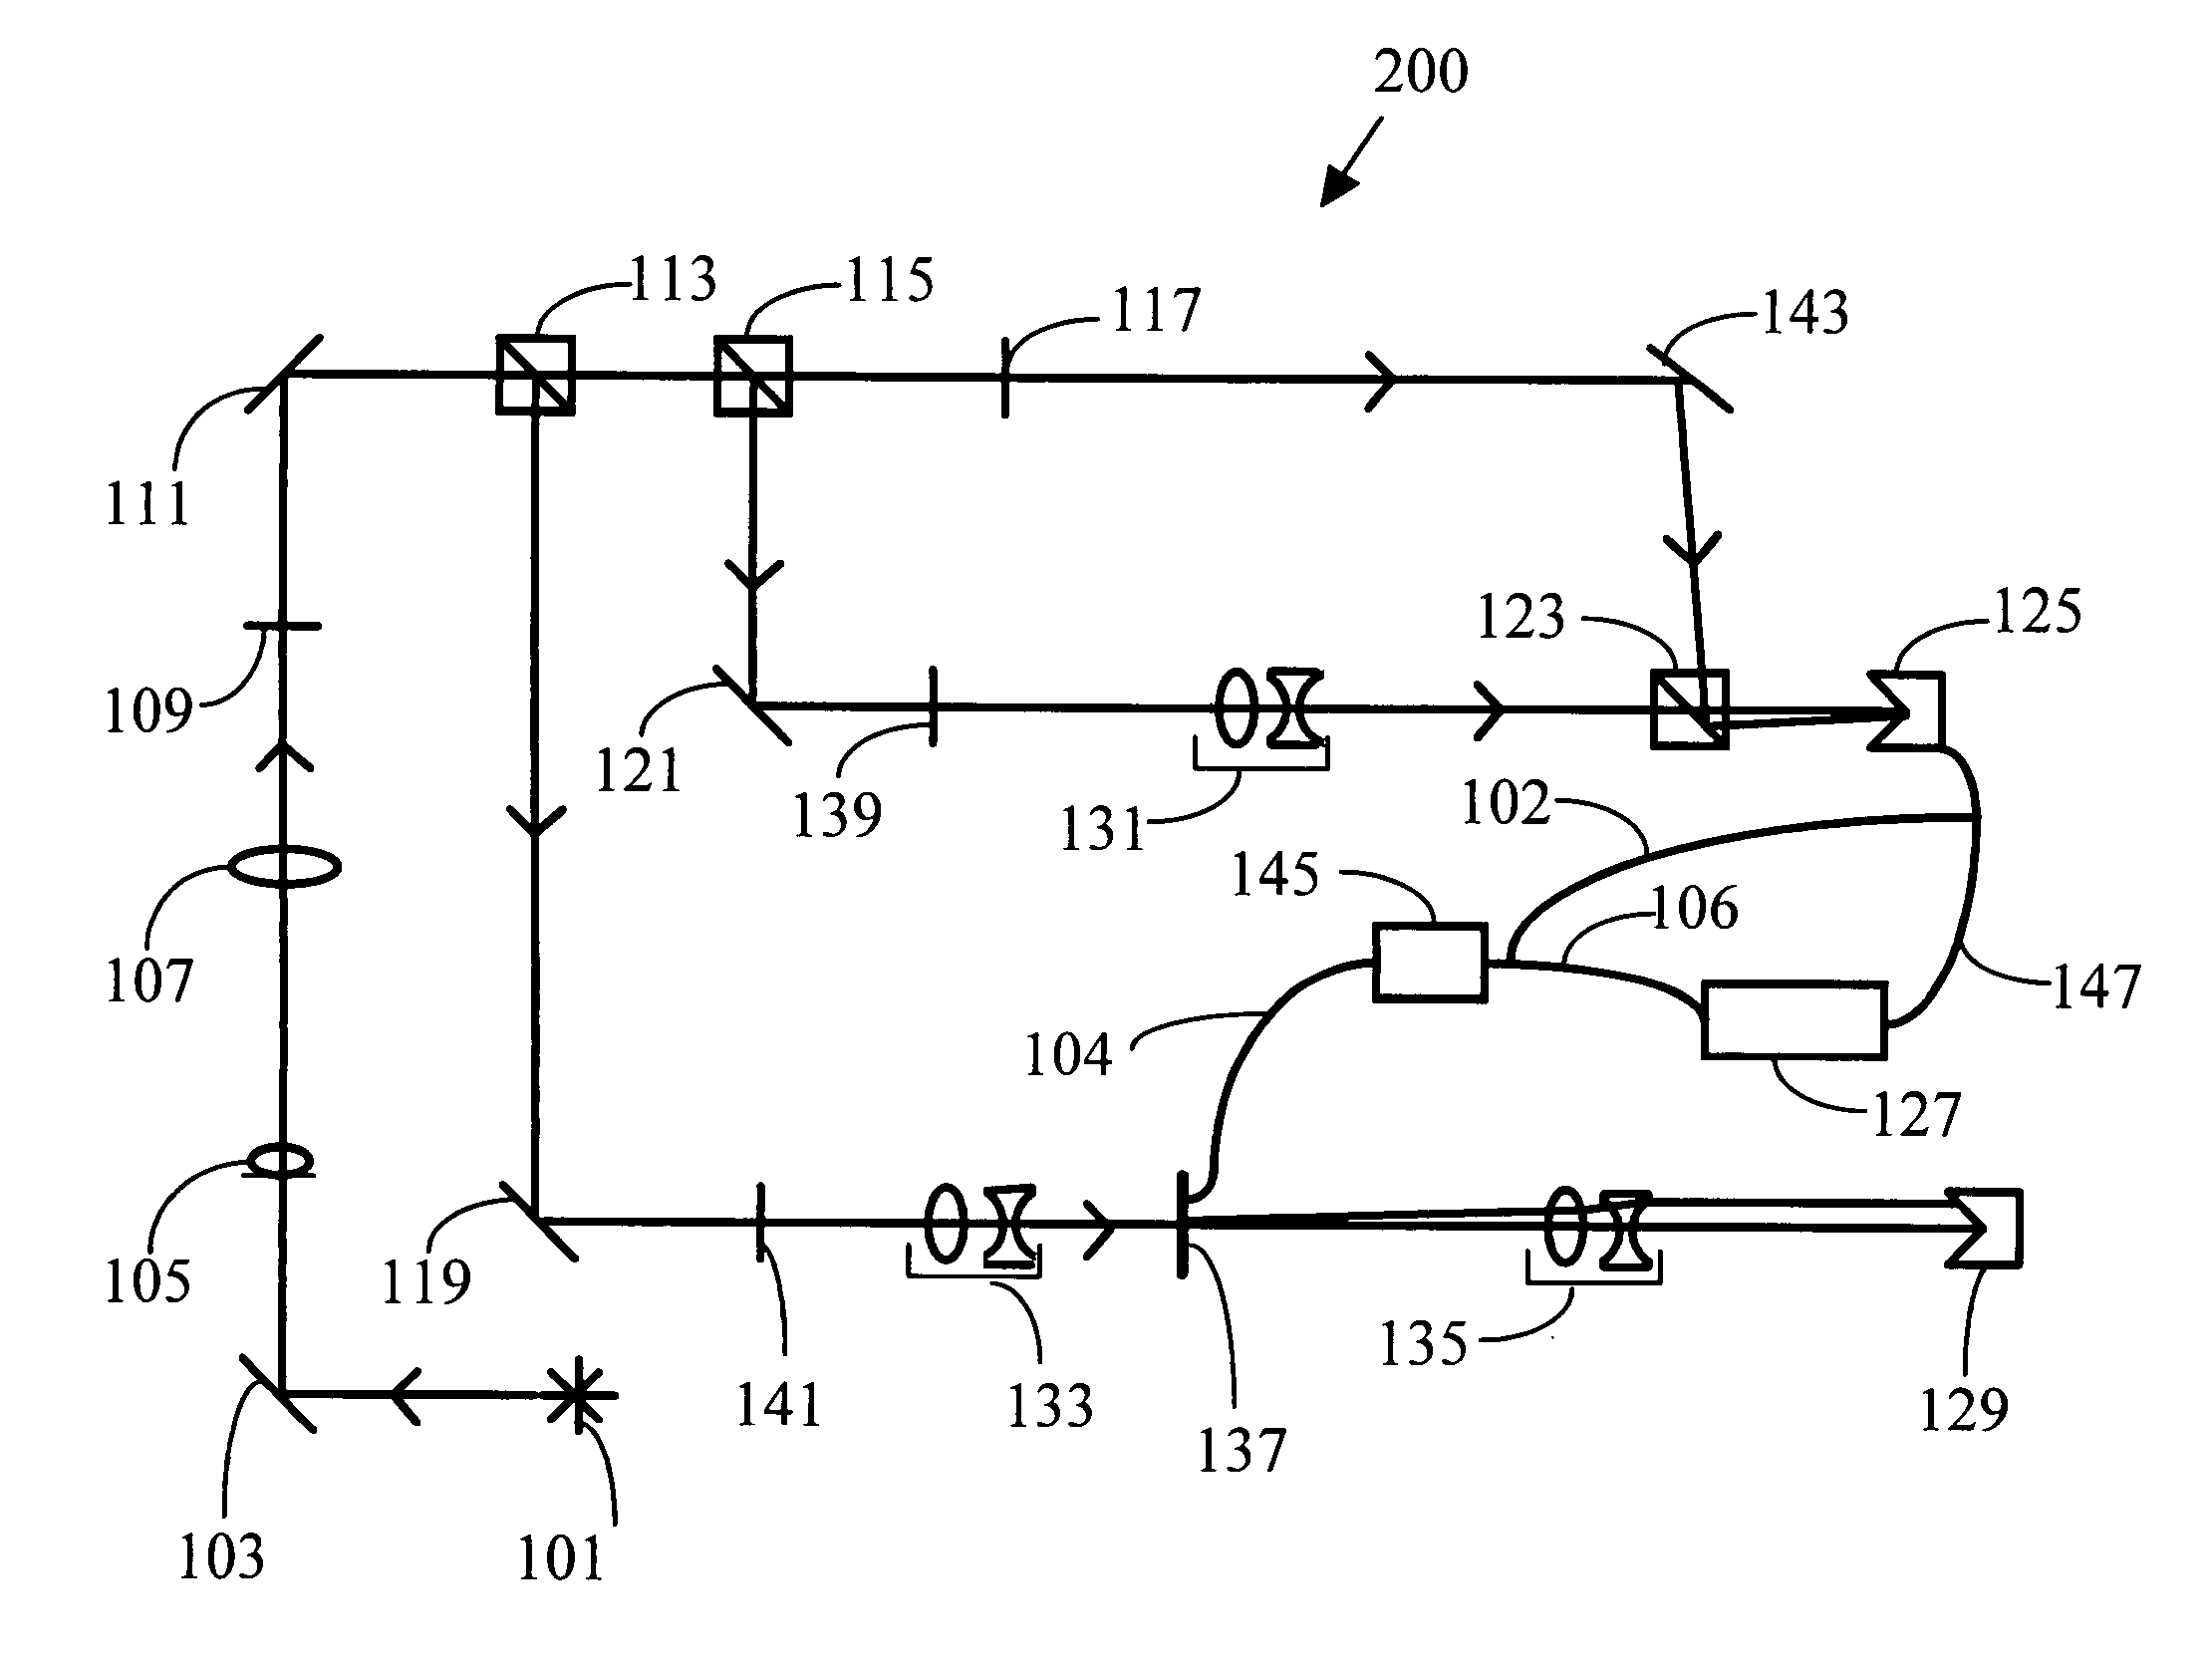 Real-time optical correlating system